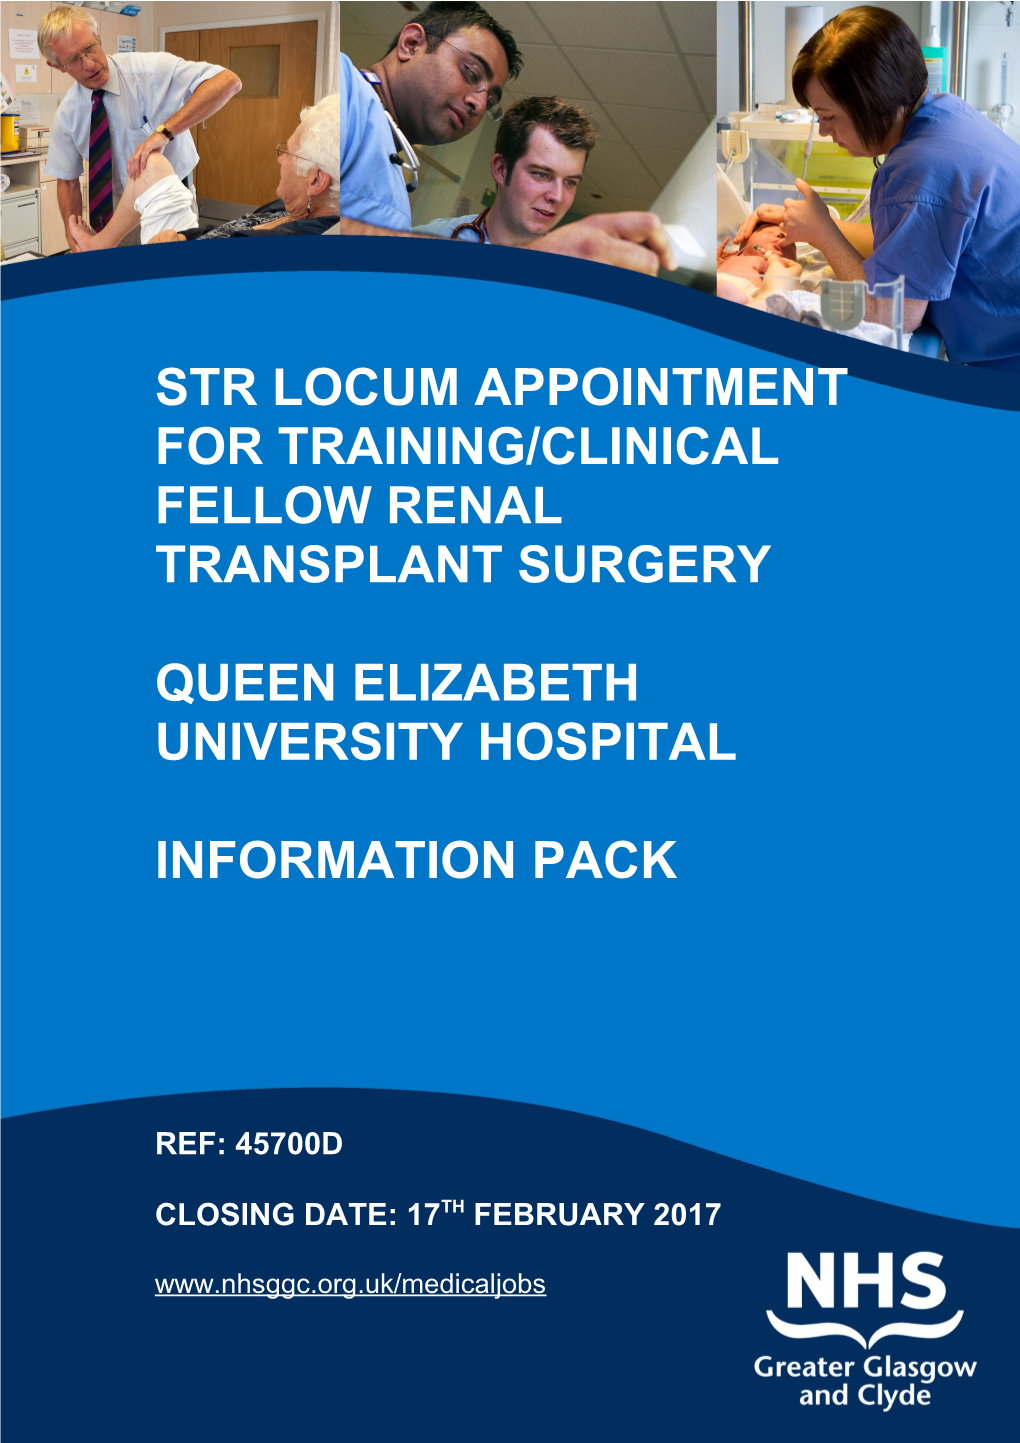 Str LOCUM APPOINTMENT for TRAINING/CLINICAL FELLOW RENAL TRANSPLANT SURGERY